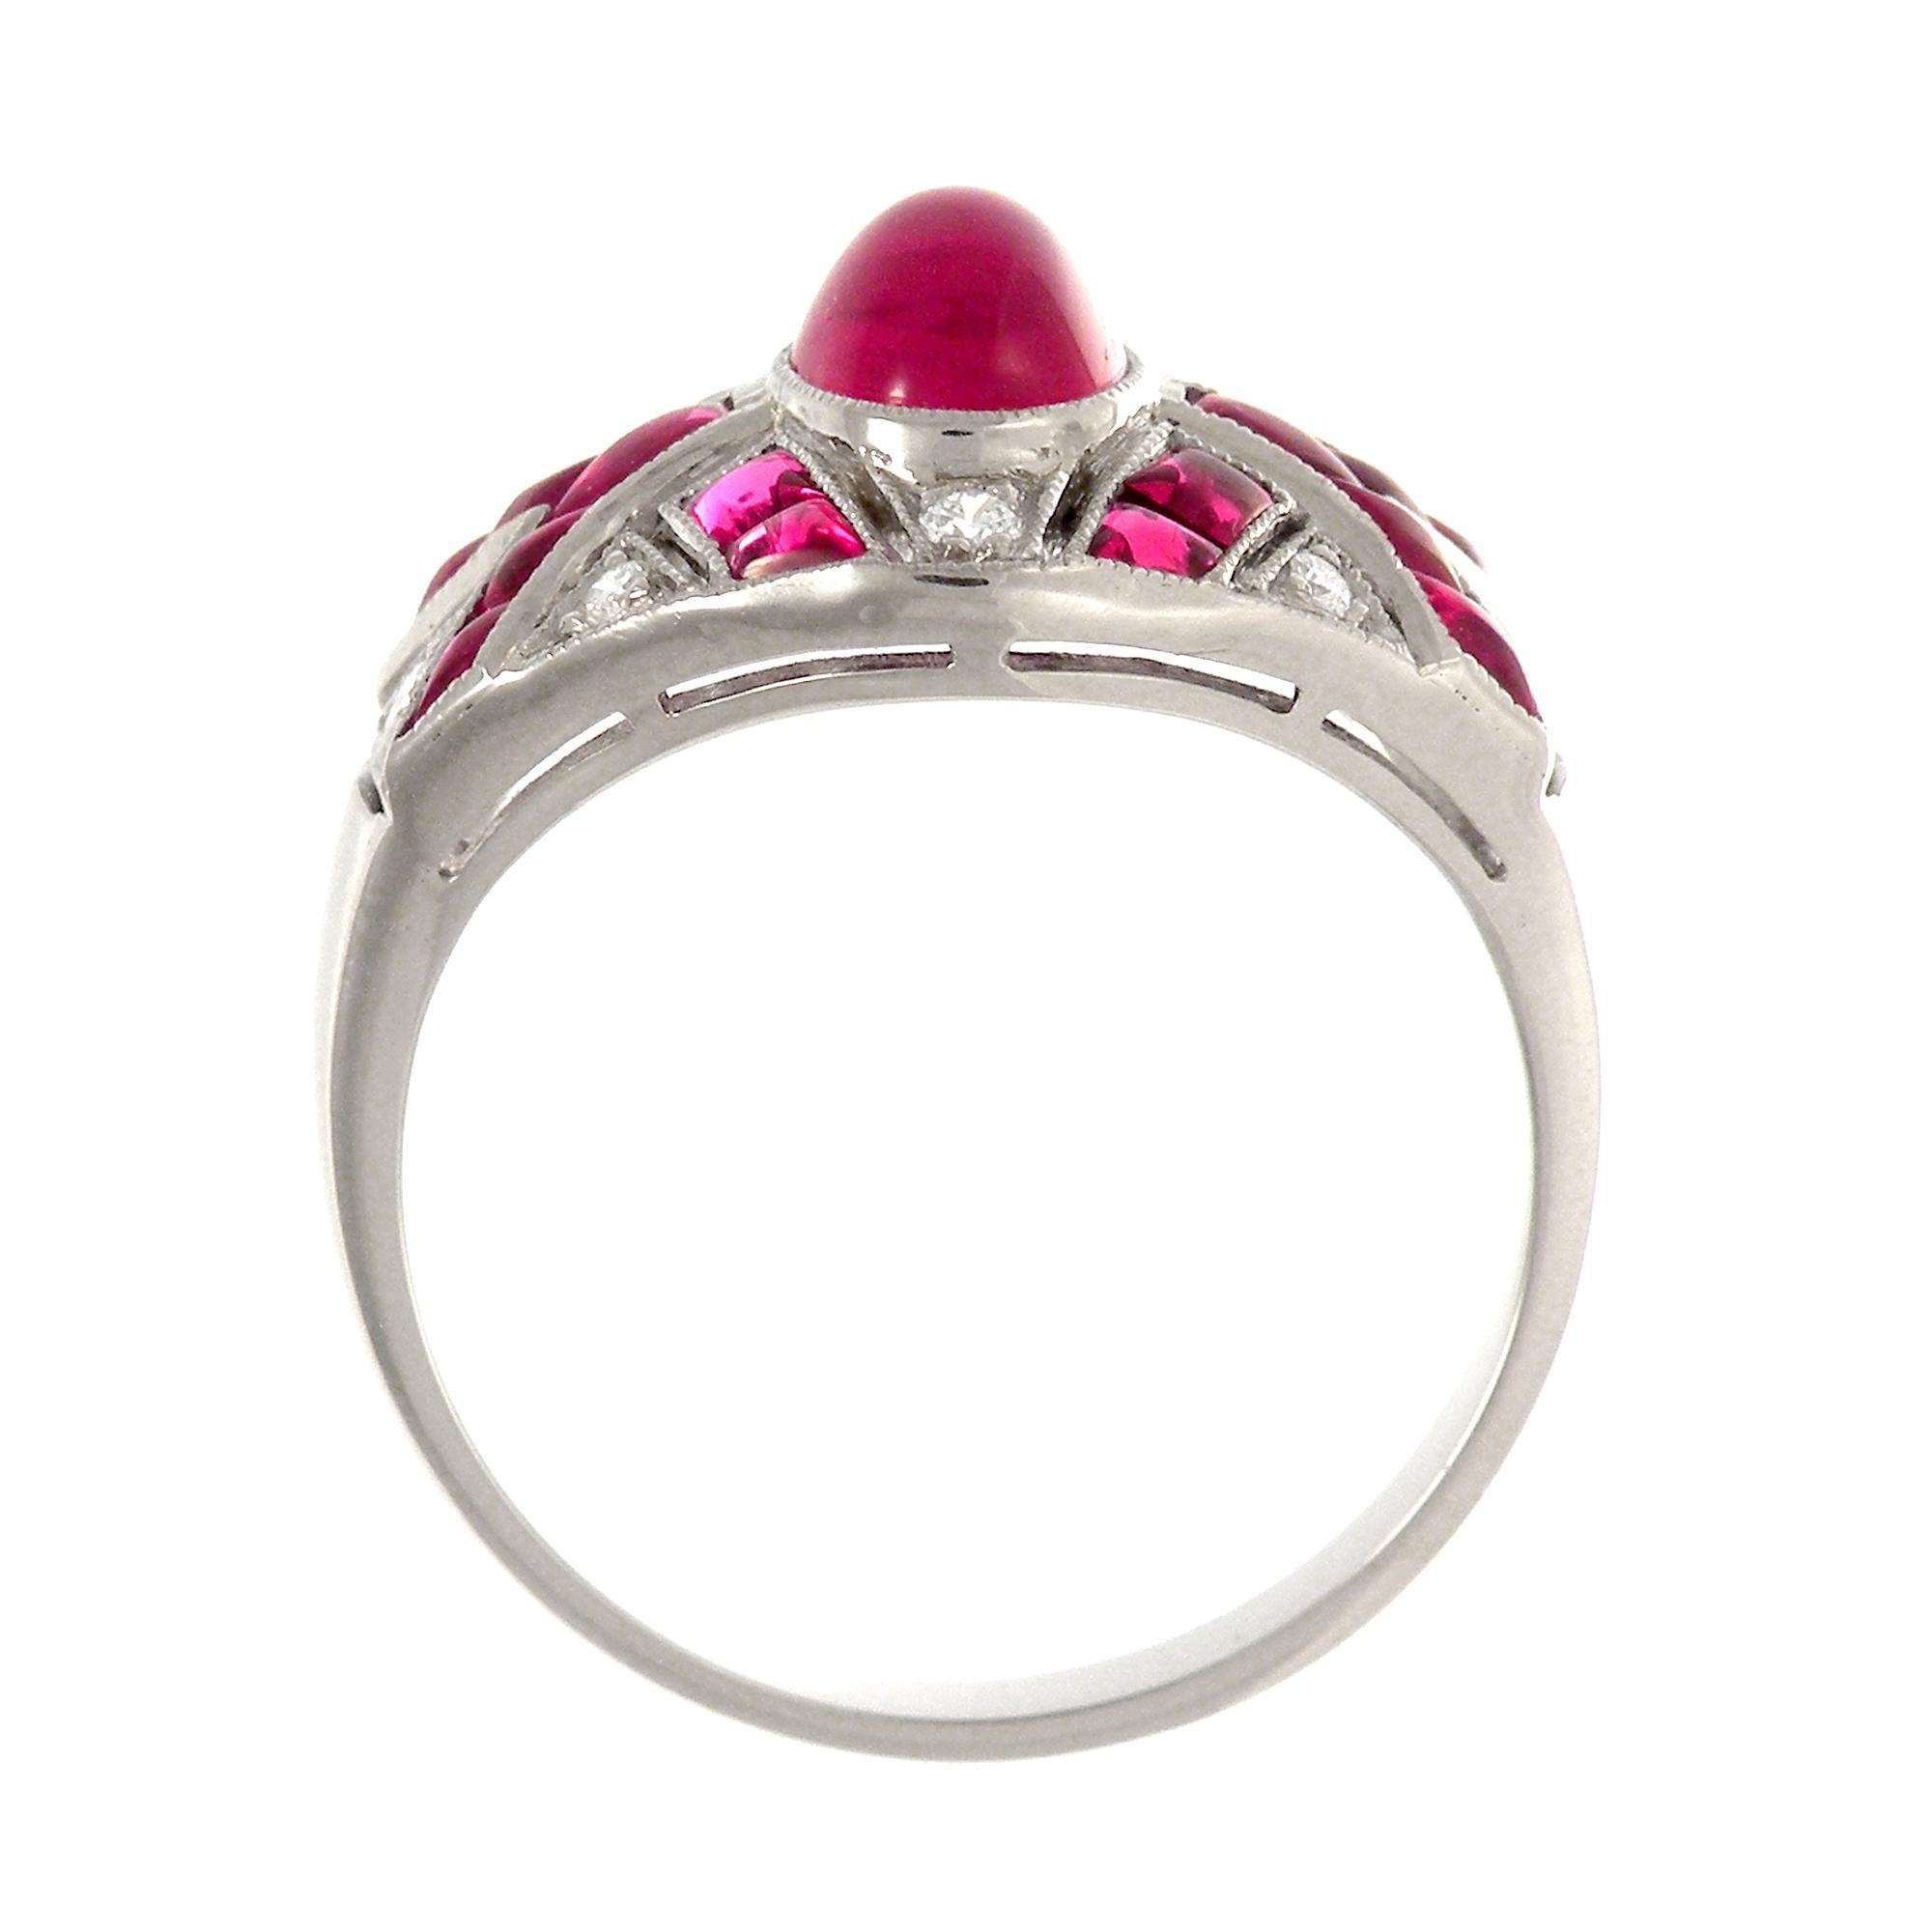 This is a fantastic Art Deco ruby and diamond Antique dinner ring which features a beautiful eye clean ruby weighing 1.70 cts. The mounting, which is crafted in 18K white gold, features a geometric line design buff-top ruby weighing 3.02 cts. 